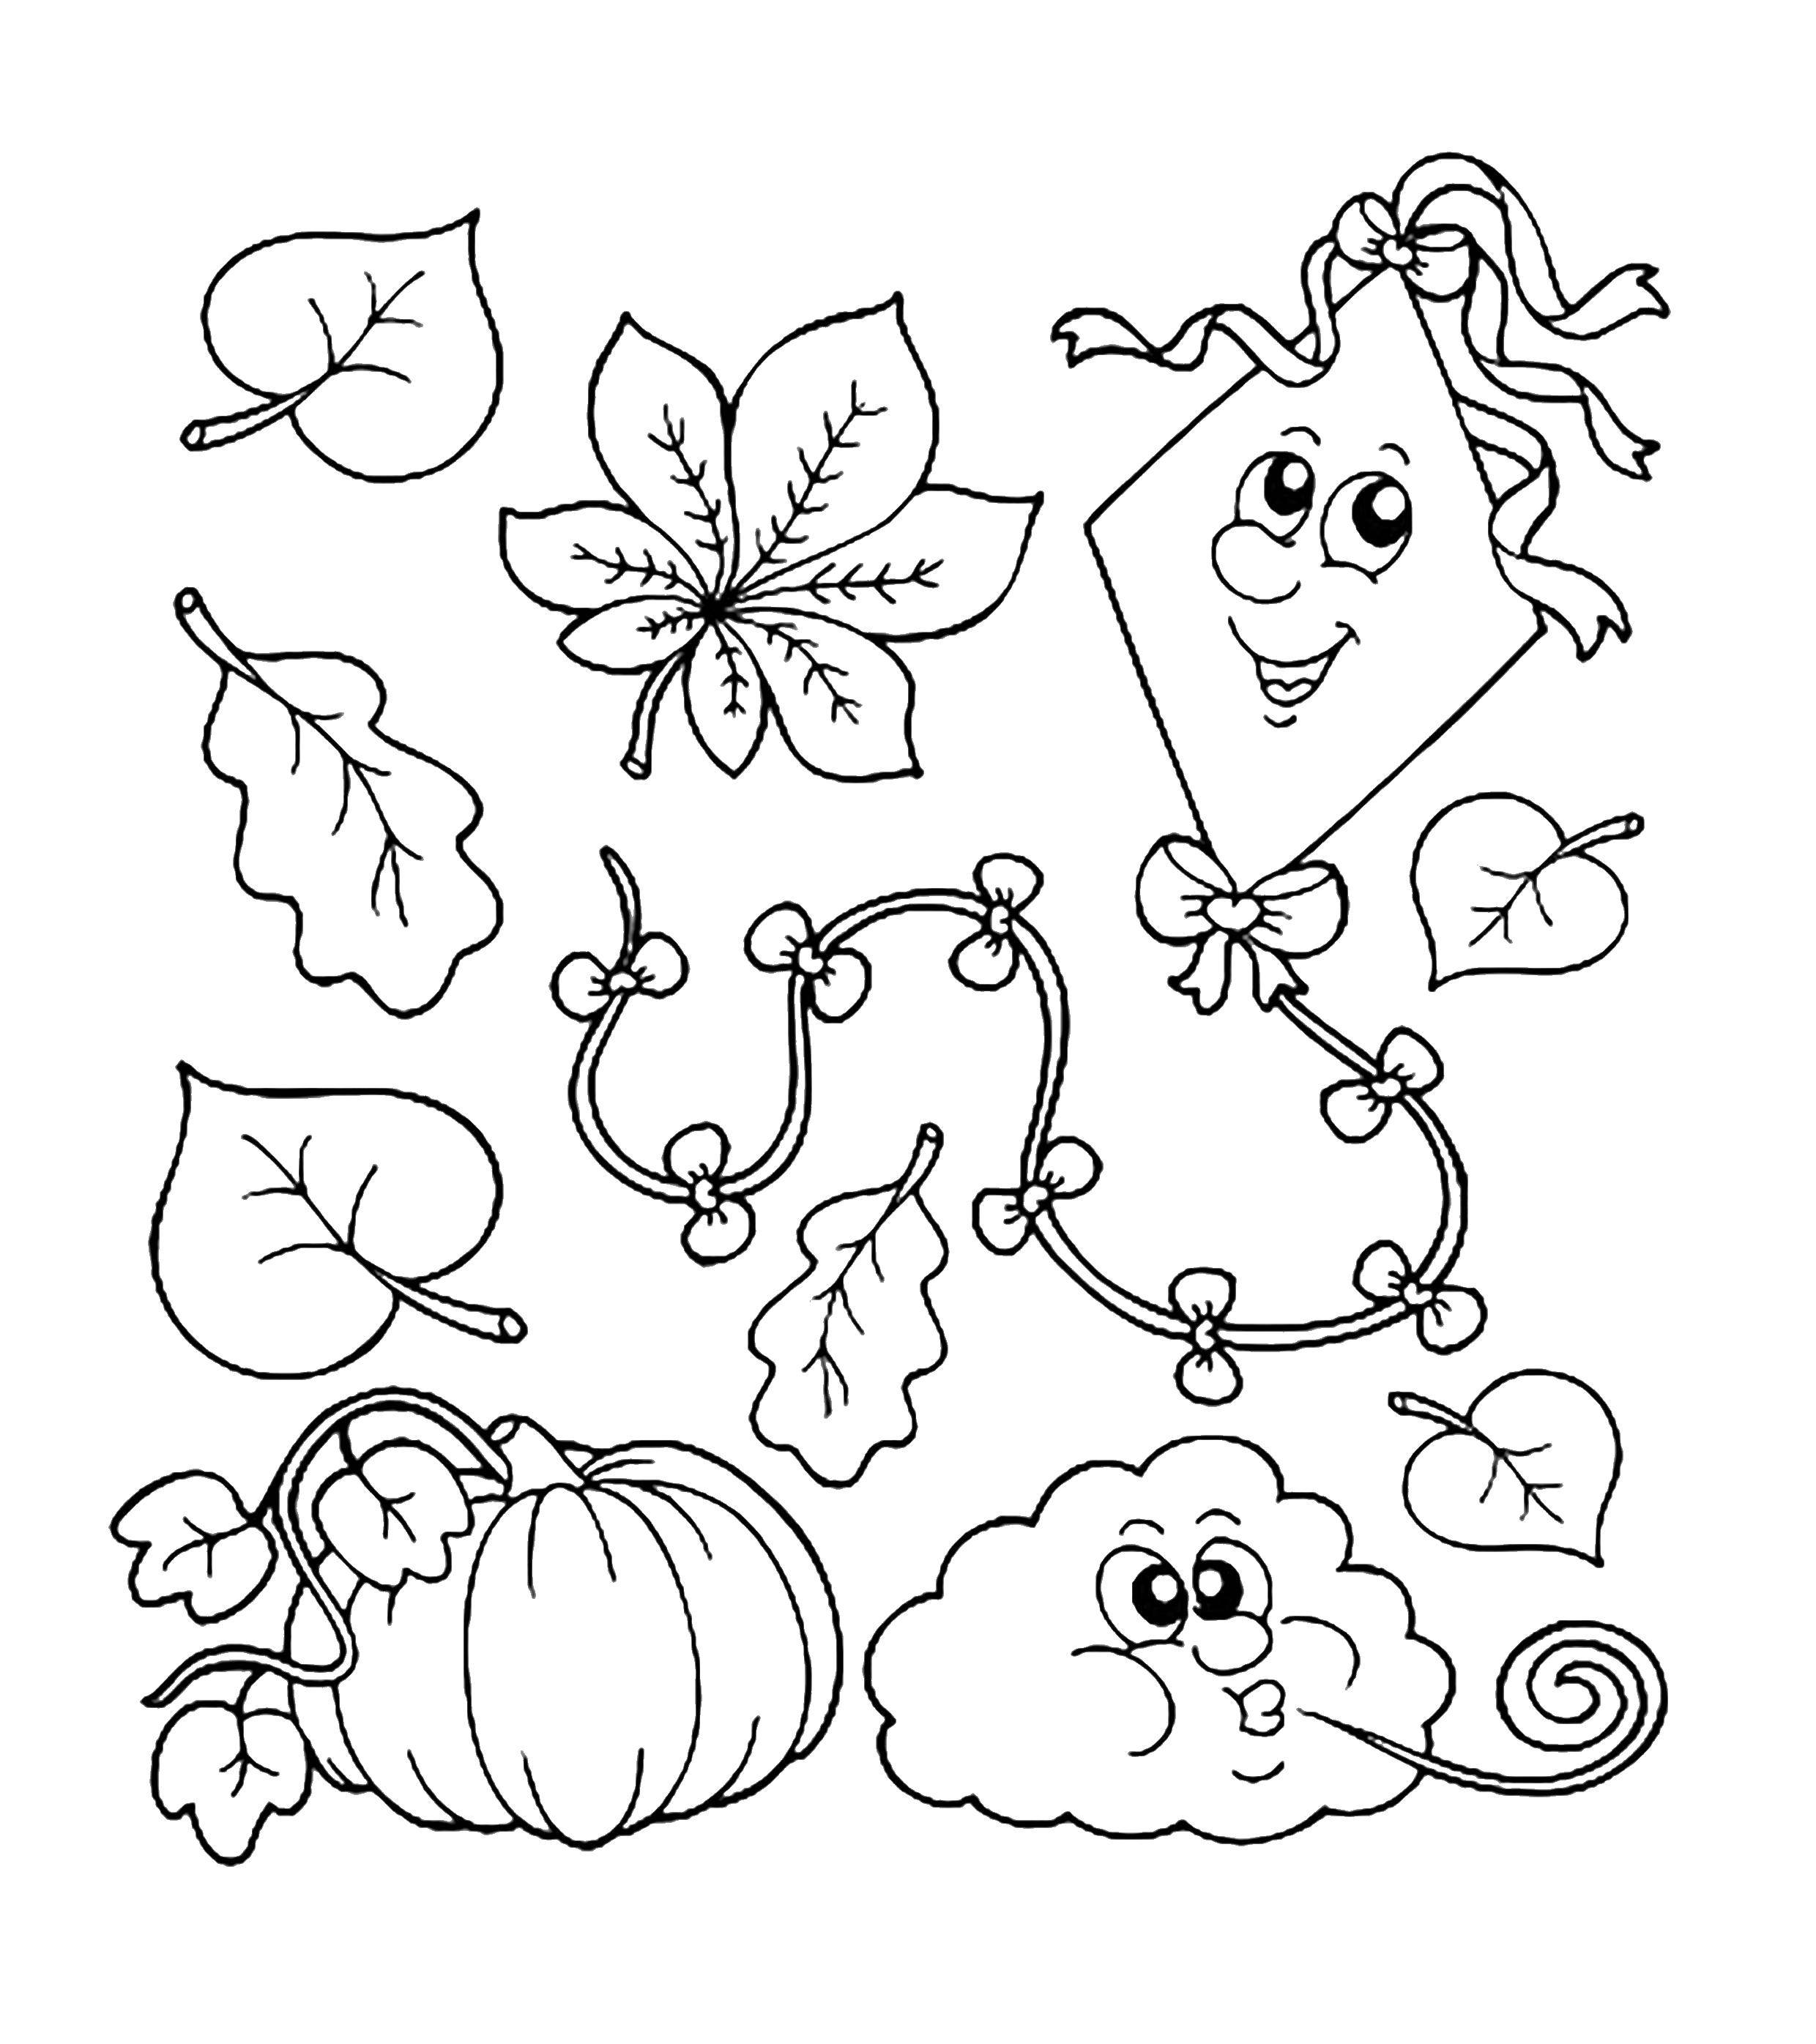 Coloring The leaves and pumpkin. Category Nature. Tags:  leaves, pumpkin.